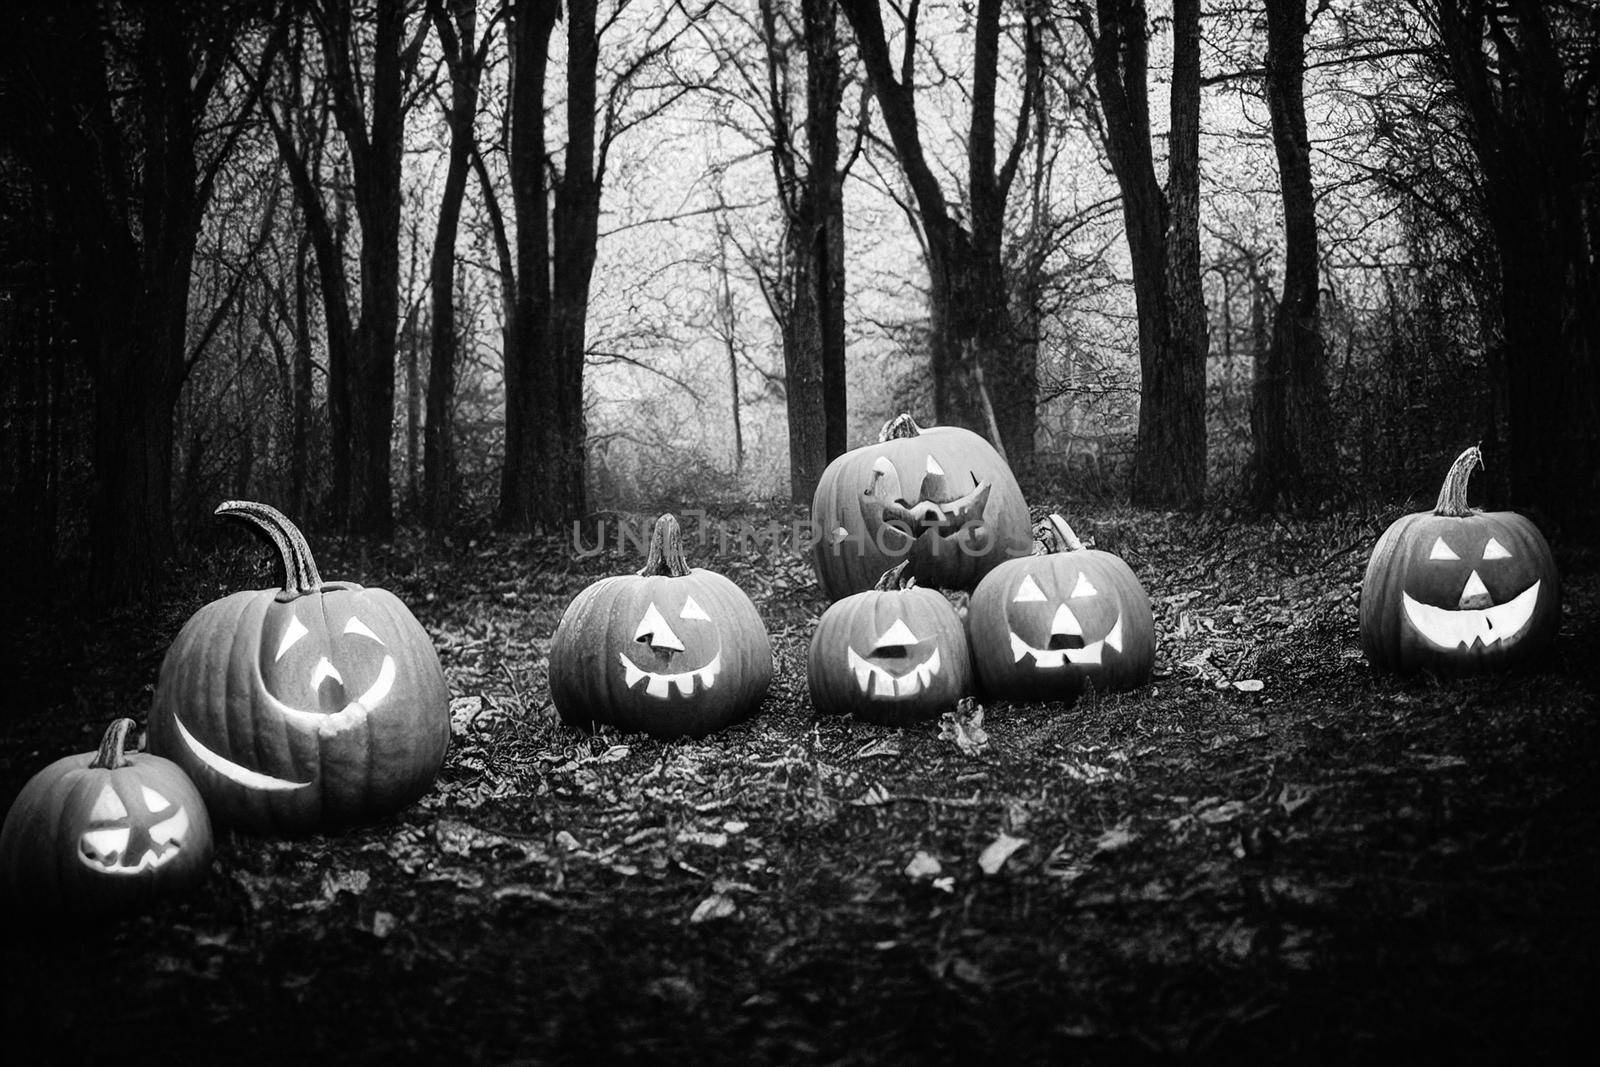 Halloween Pumpkins In A Spooky Forest At Night. 3D illustration.